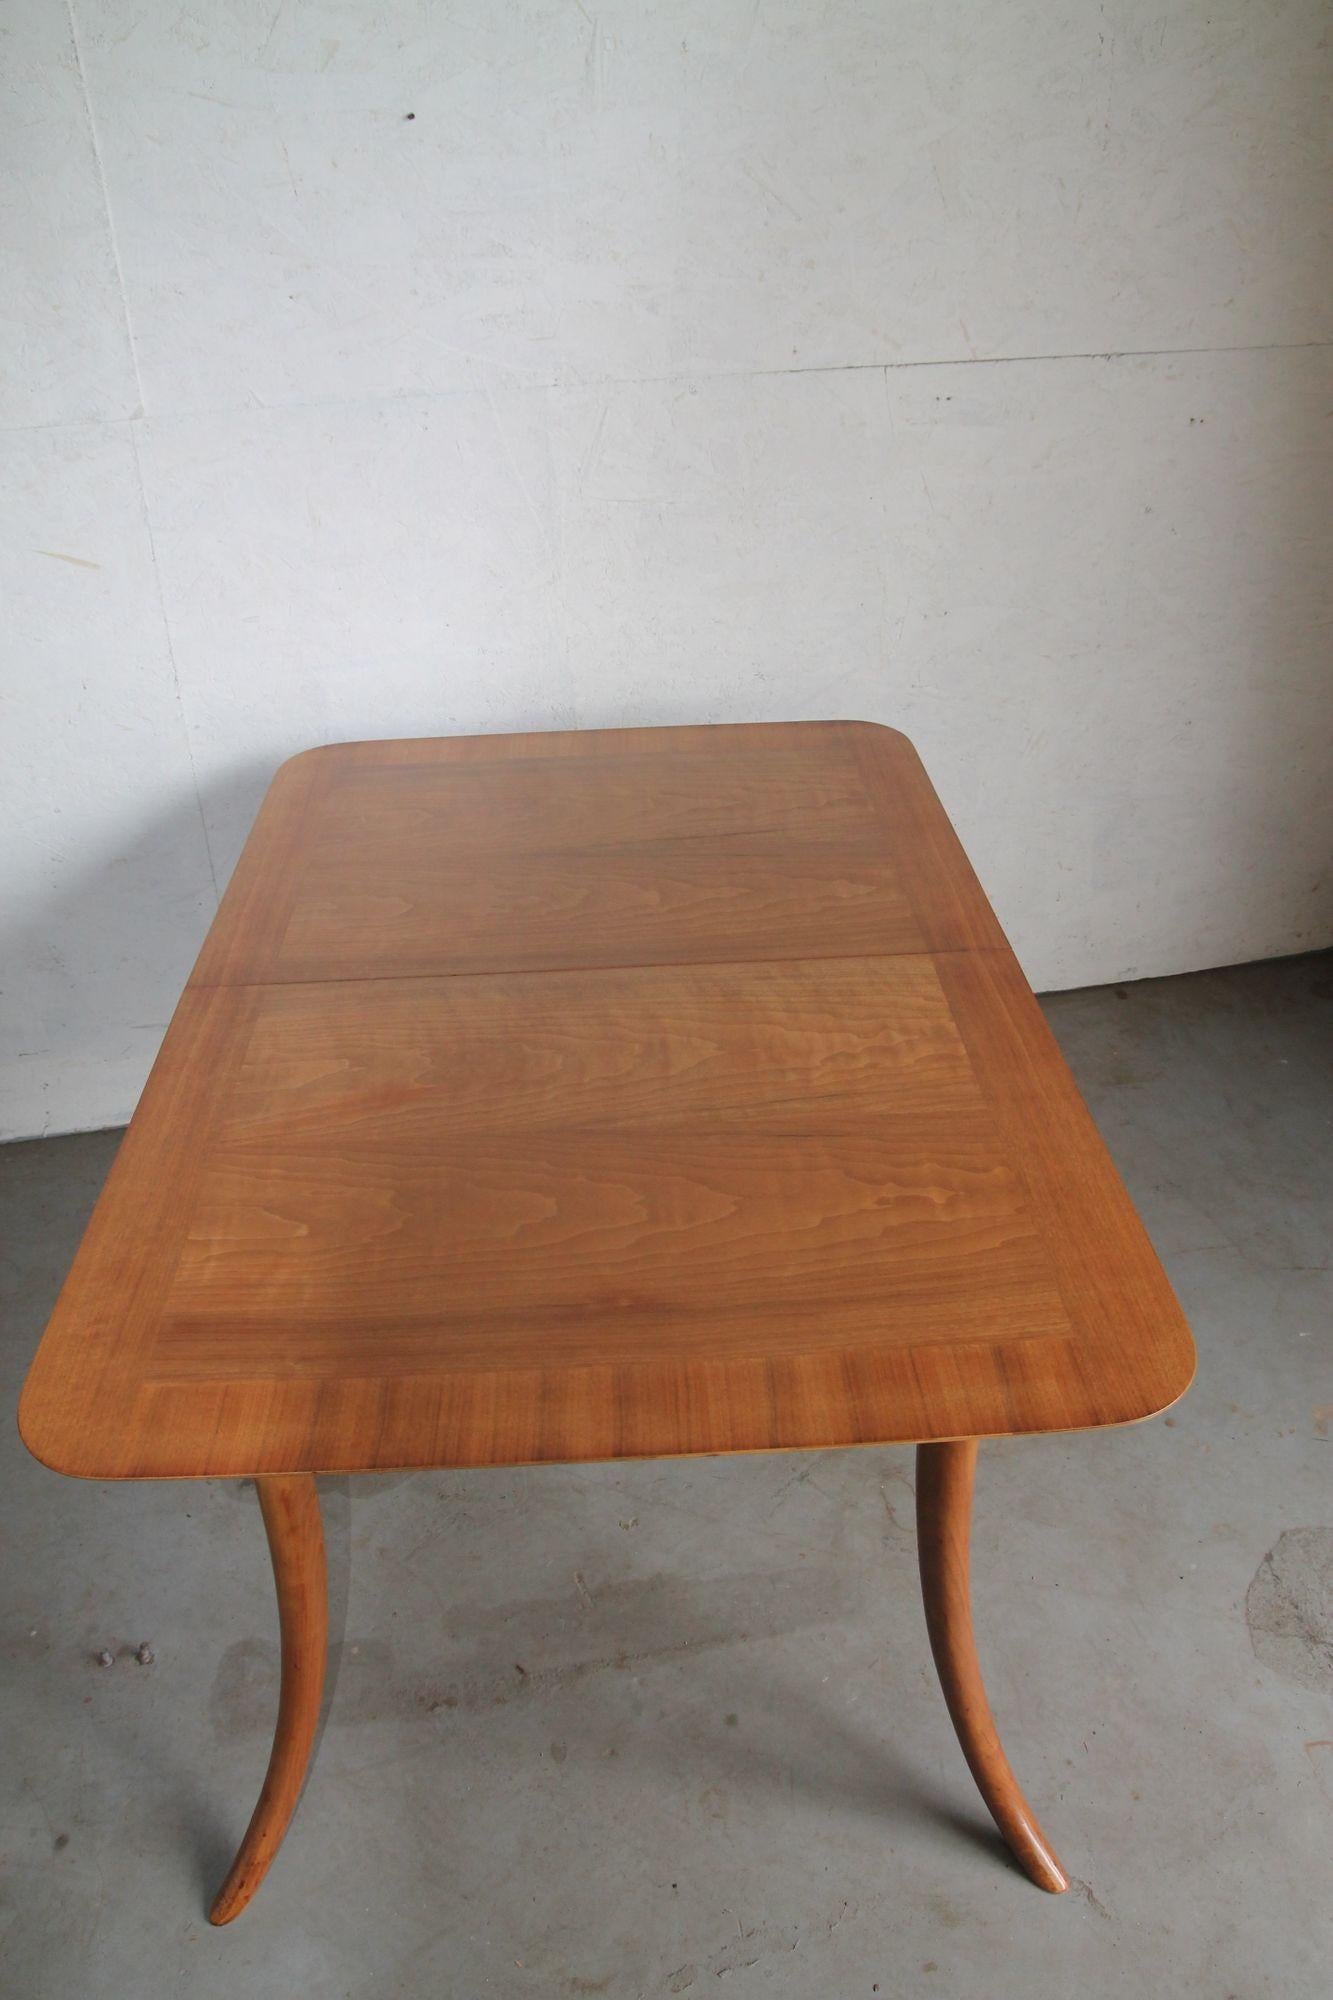 Sabre Leg Table with One Leaf by T.H. Robsjohn-Gibbings In Good Condition For Sale In Asbury Park, NJ